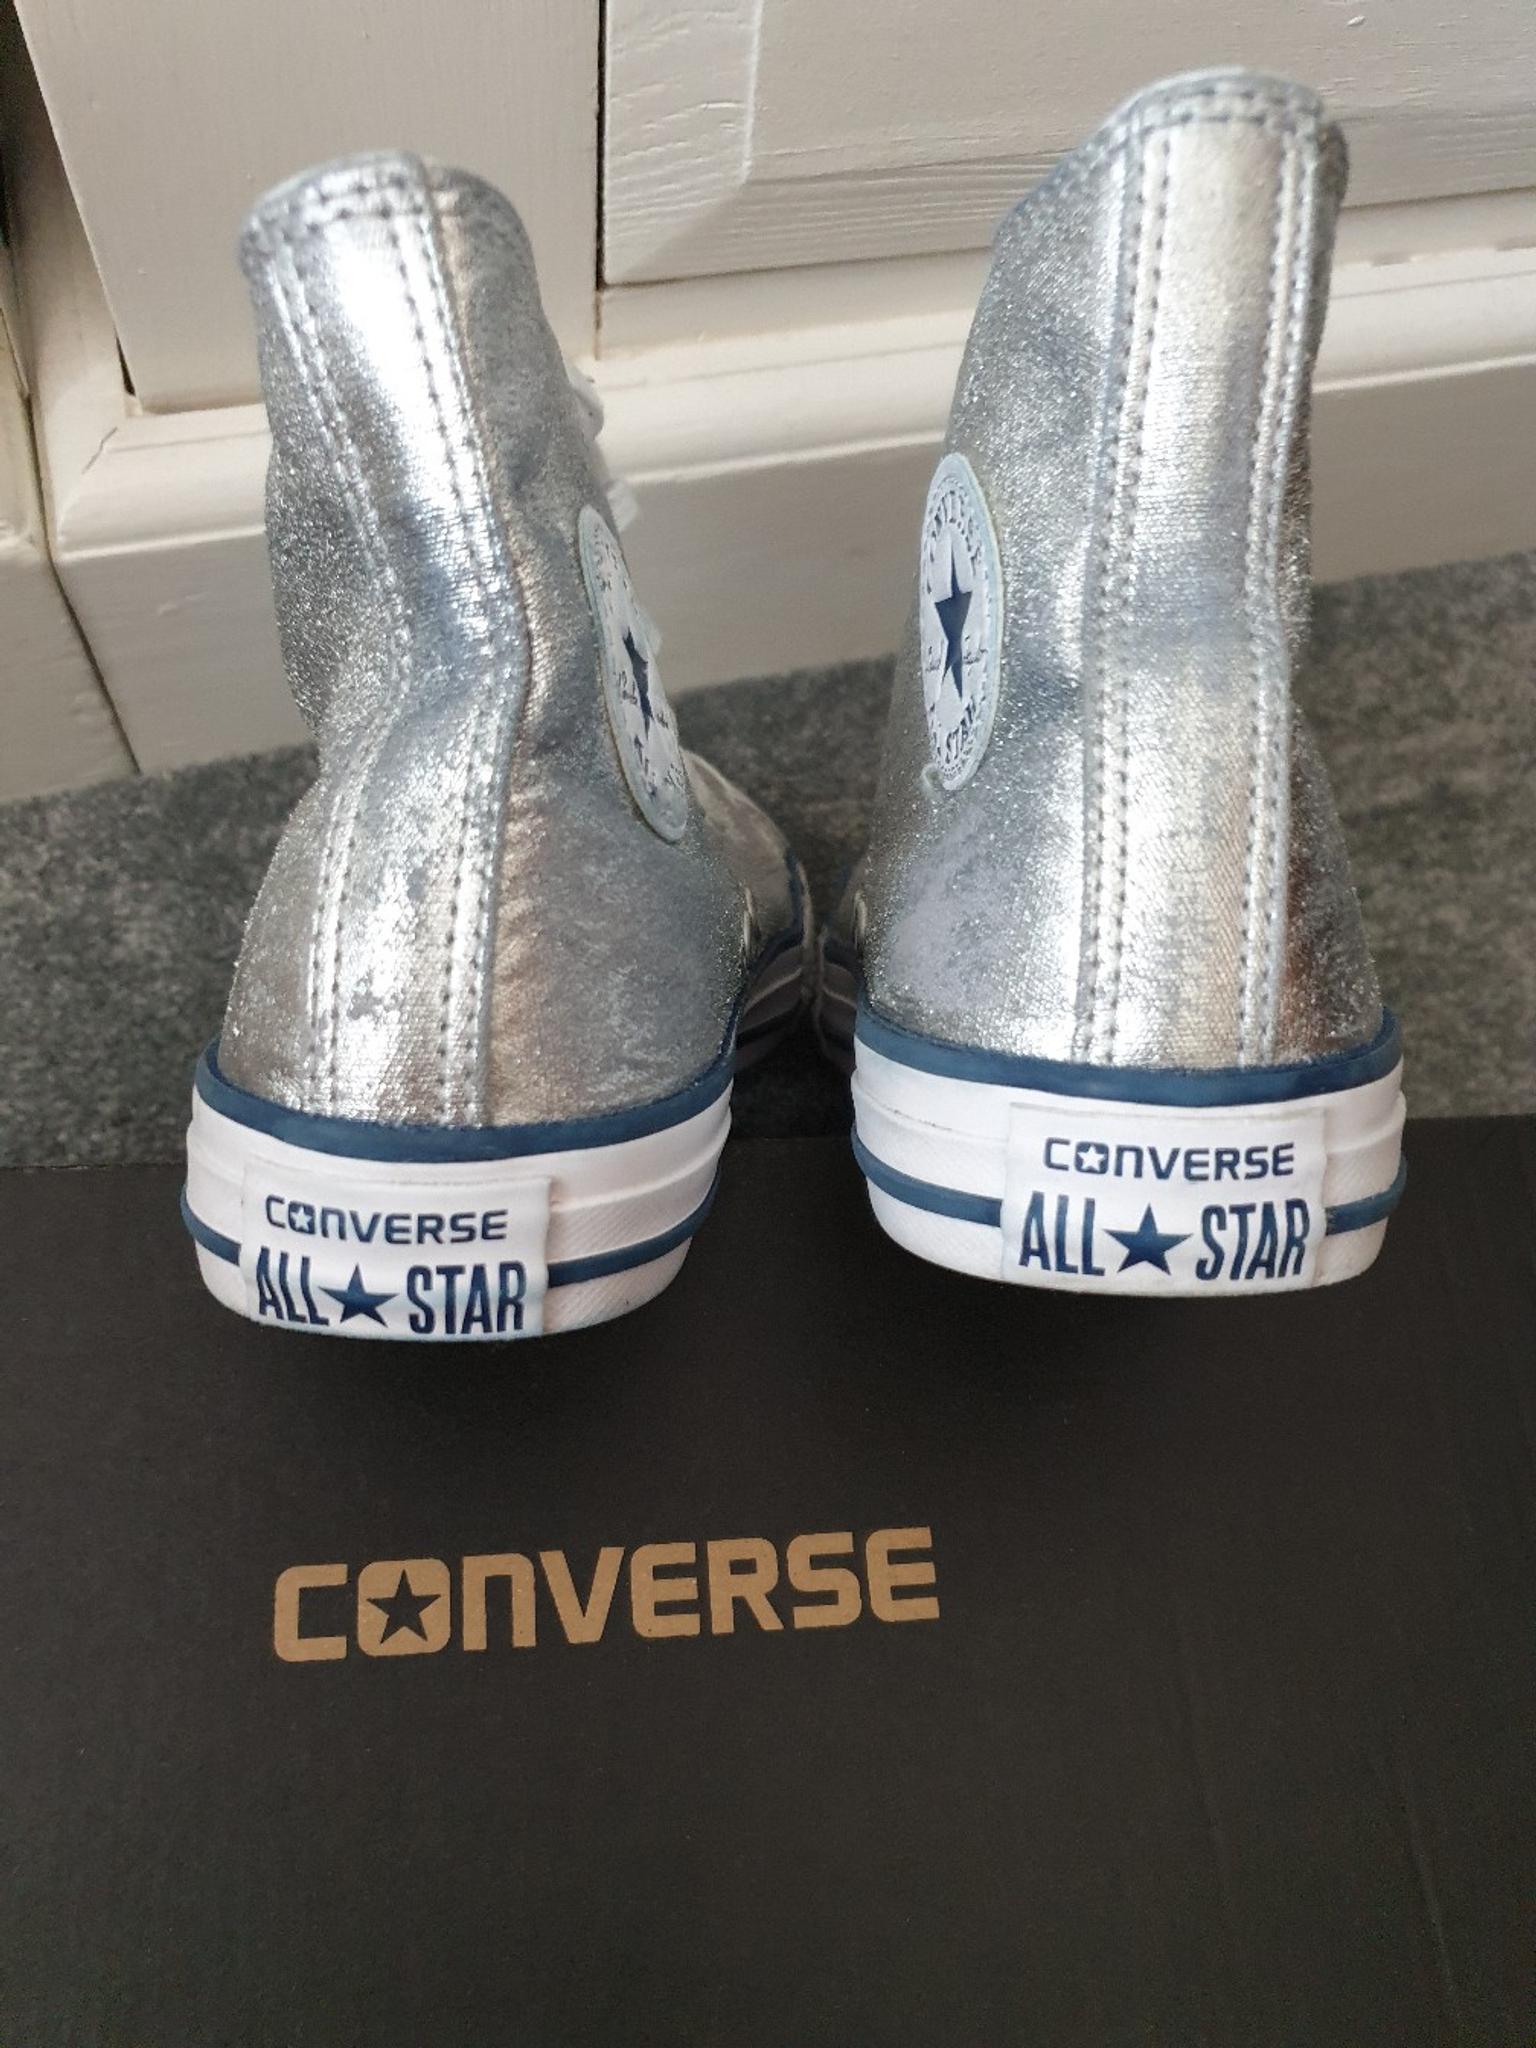 converse uk 2 in SM5 Sutton for £5.00 for sale | Shpock